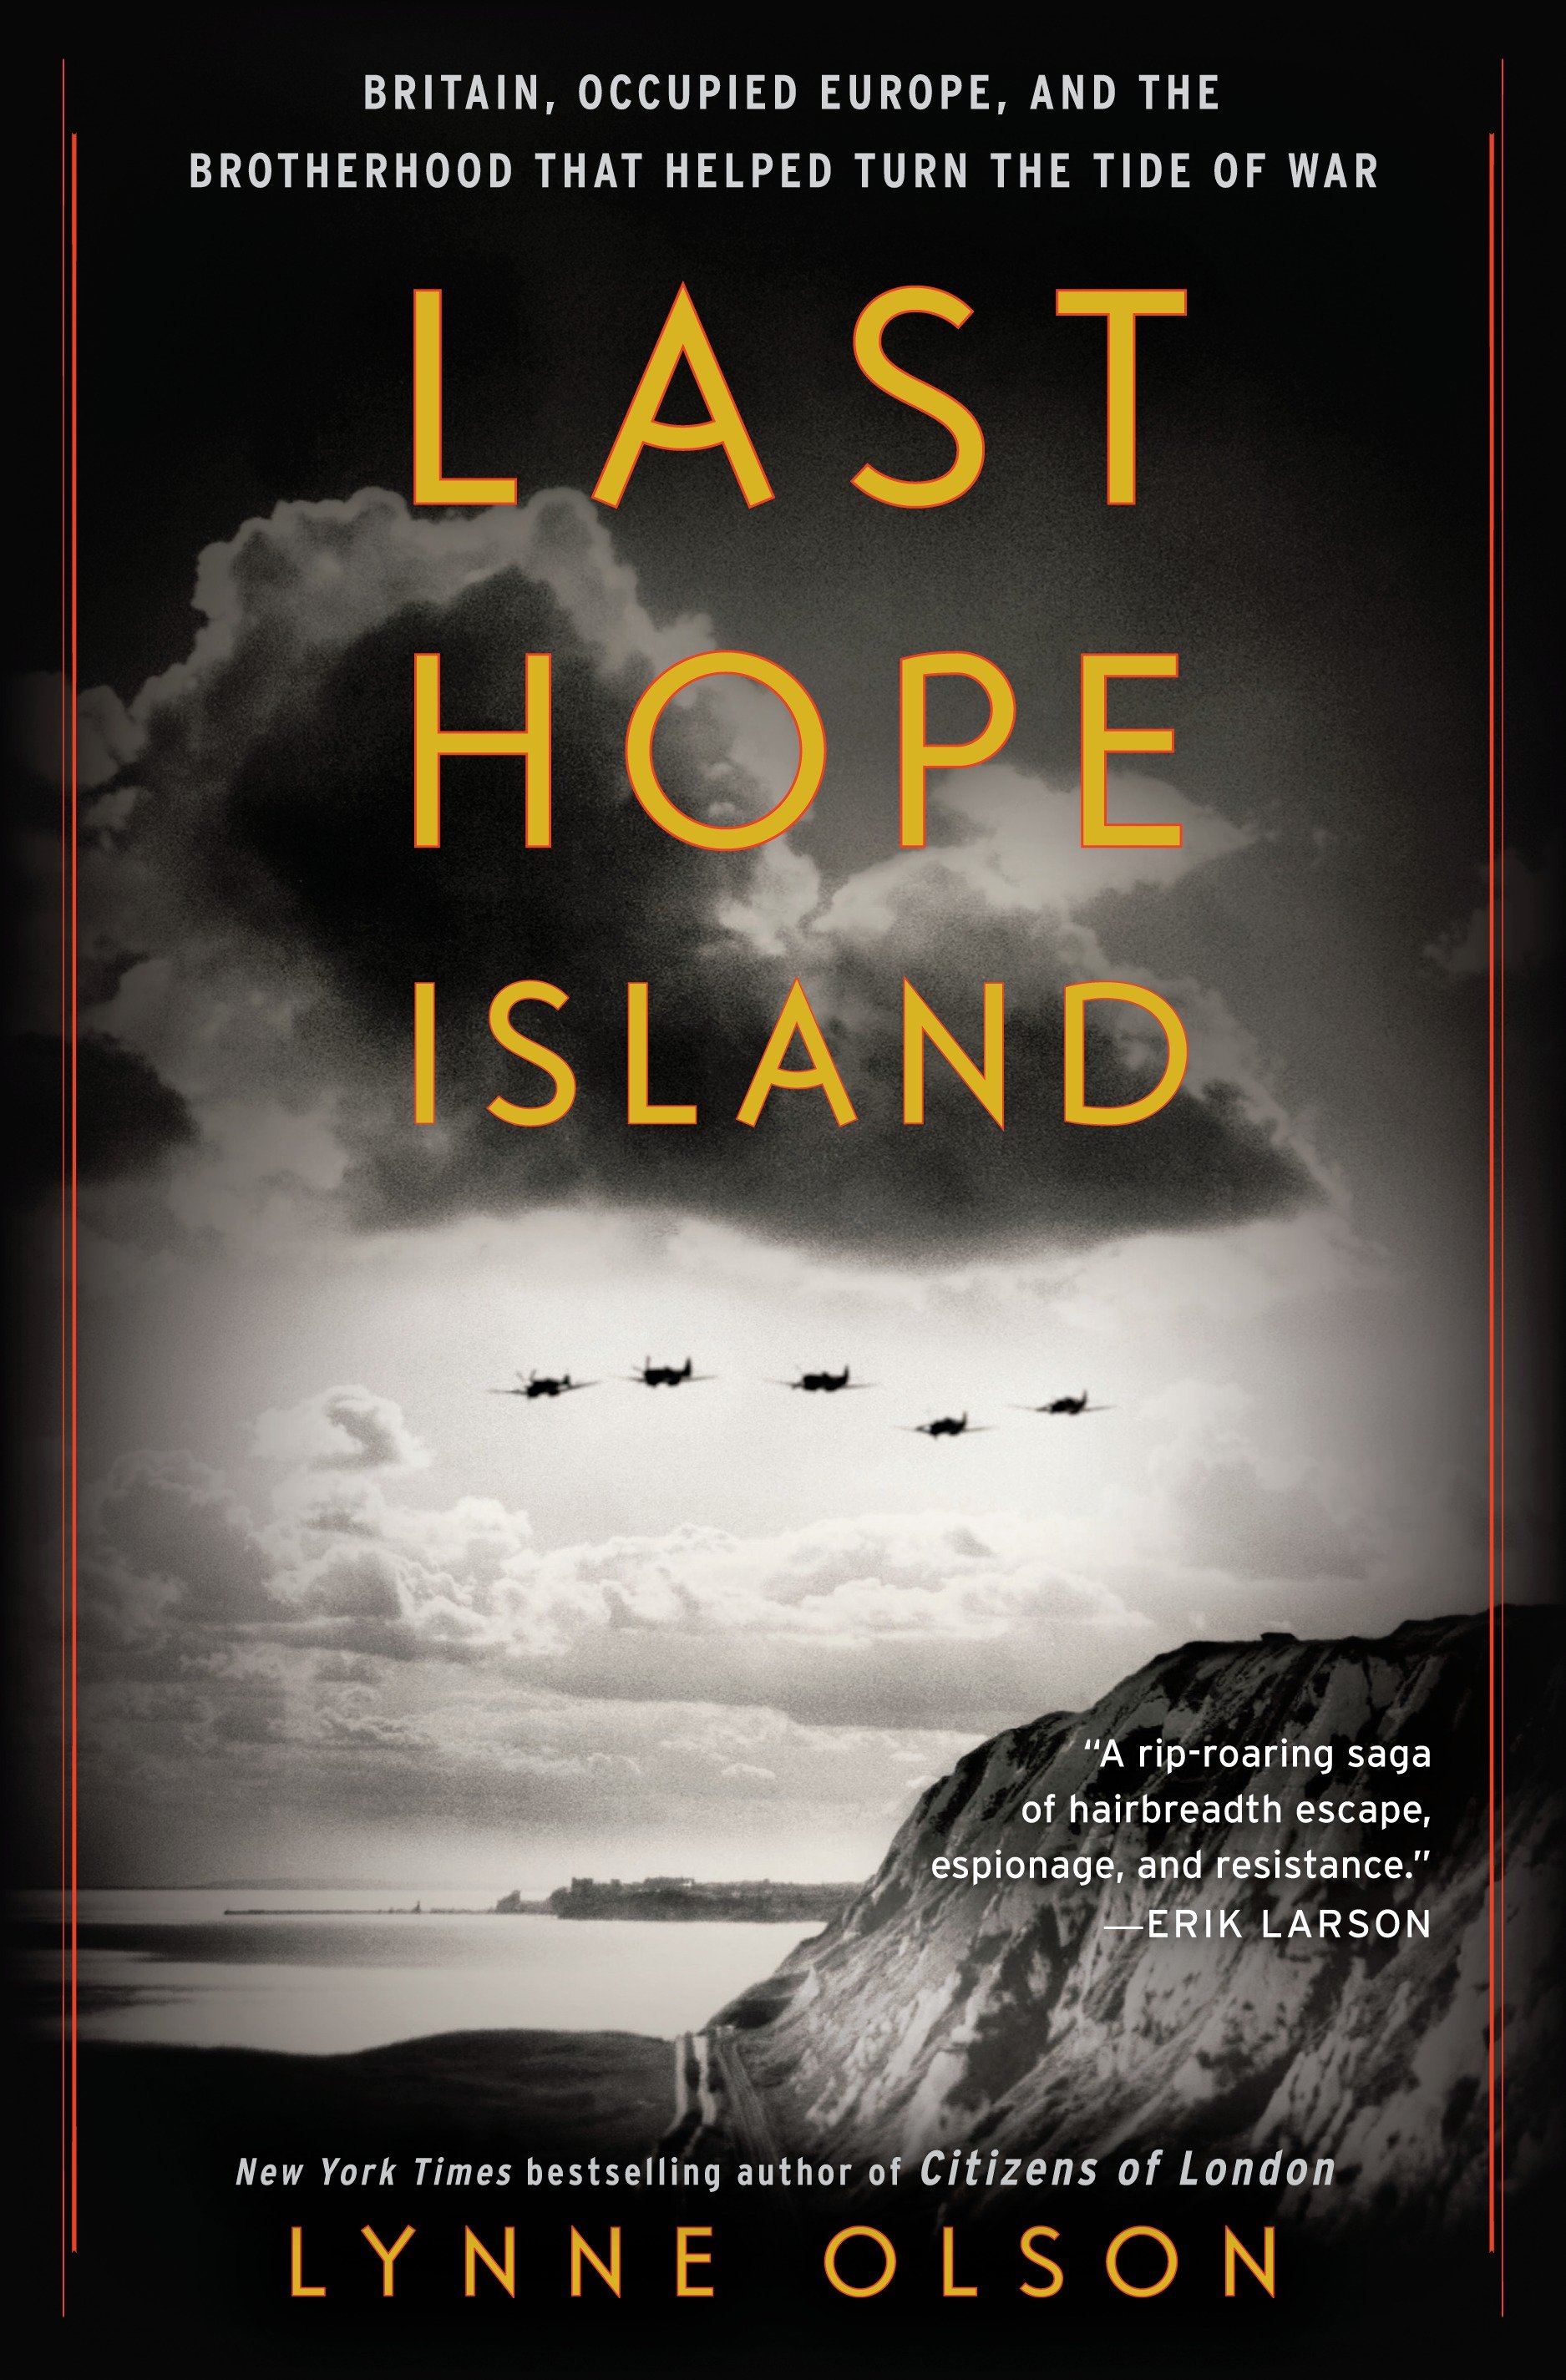 Last Hope Island Britain, occupied Europe, and the brotherhood that helped turn the tide of war cover image